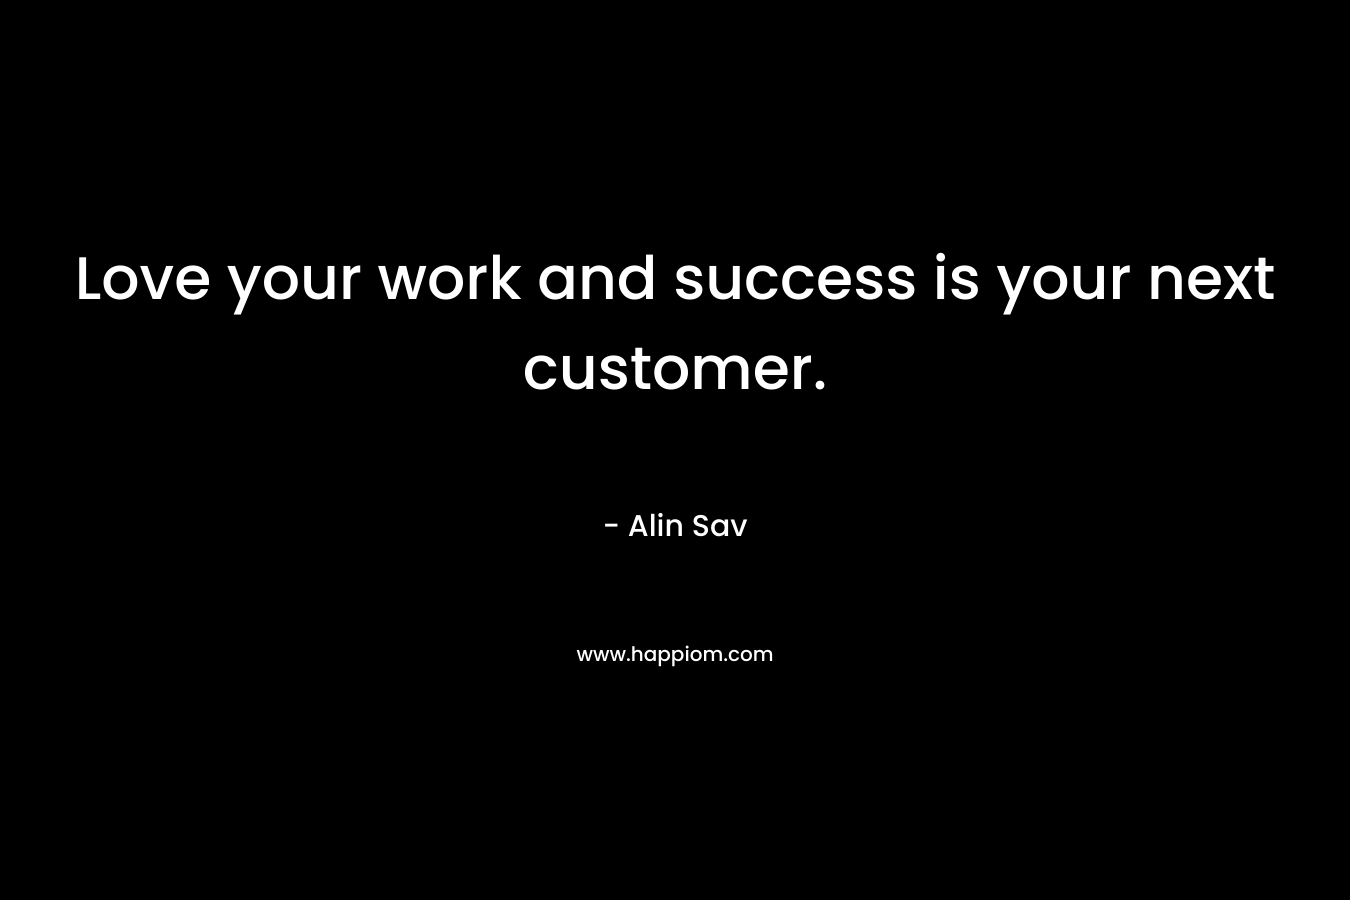 Love your work and success is your next customer. – Alin Sav